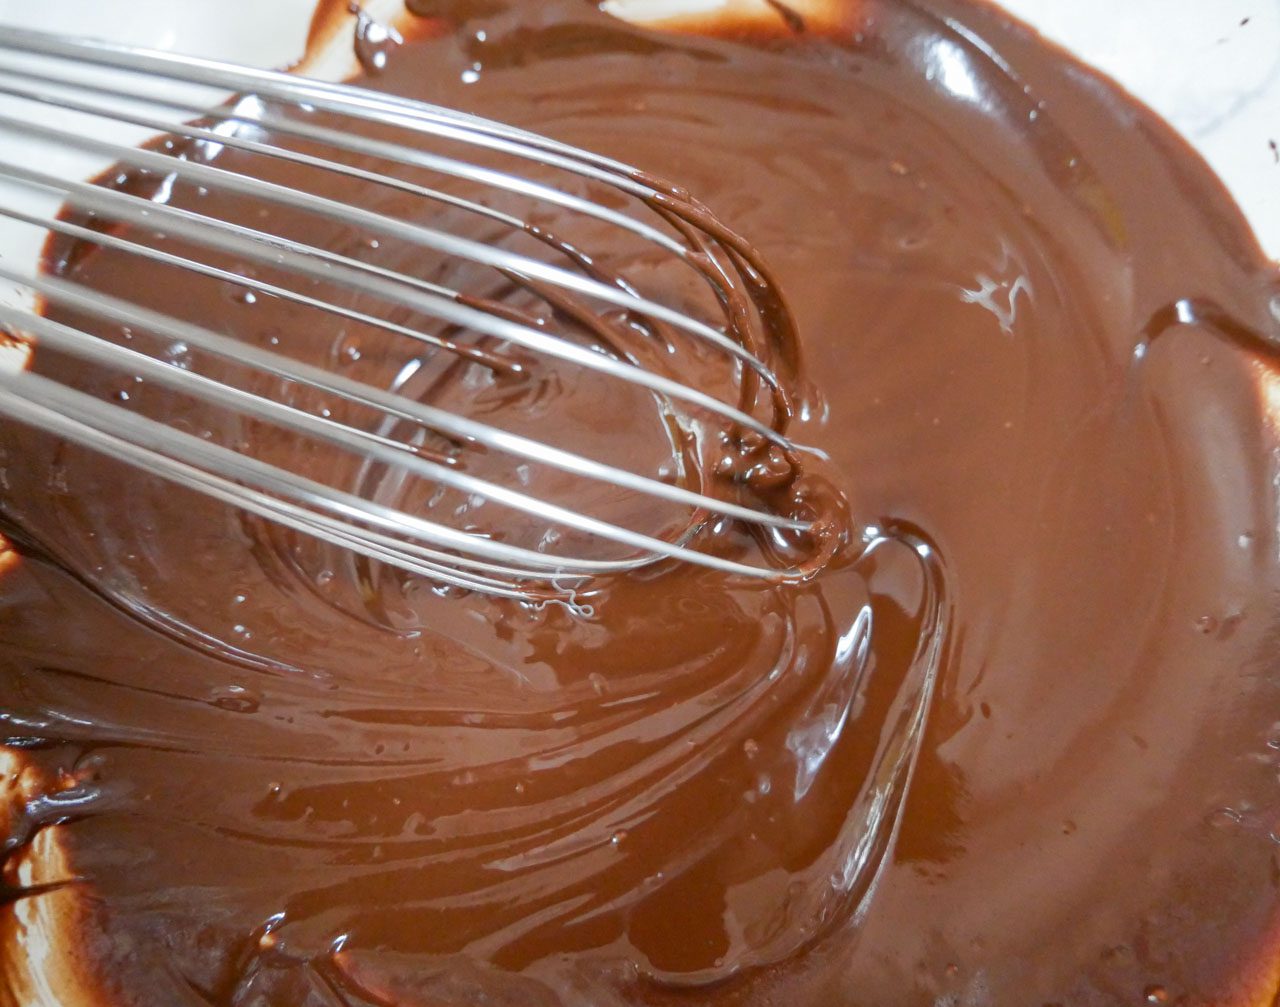 Chocolate melted and whisked in a bowl